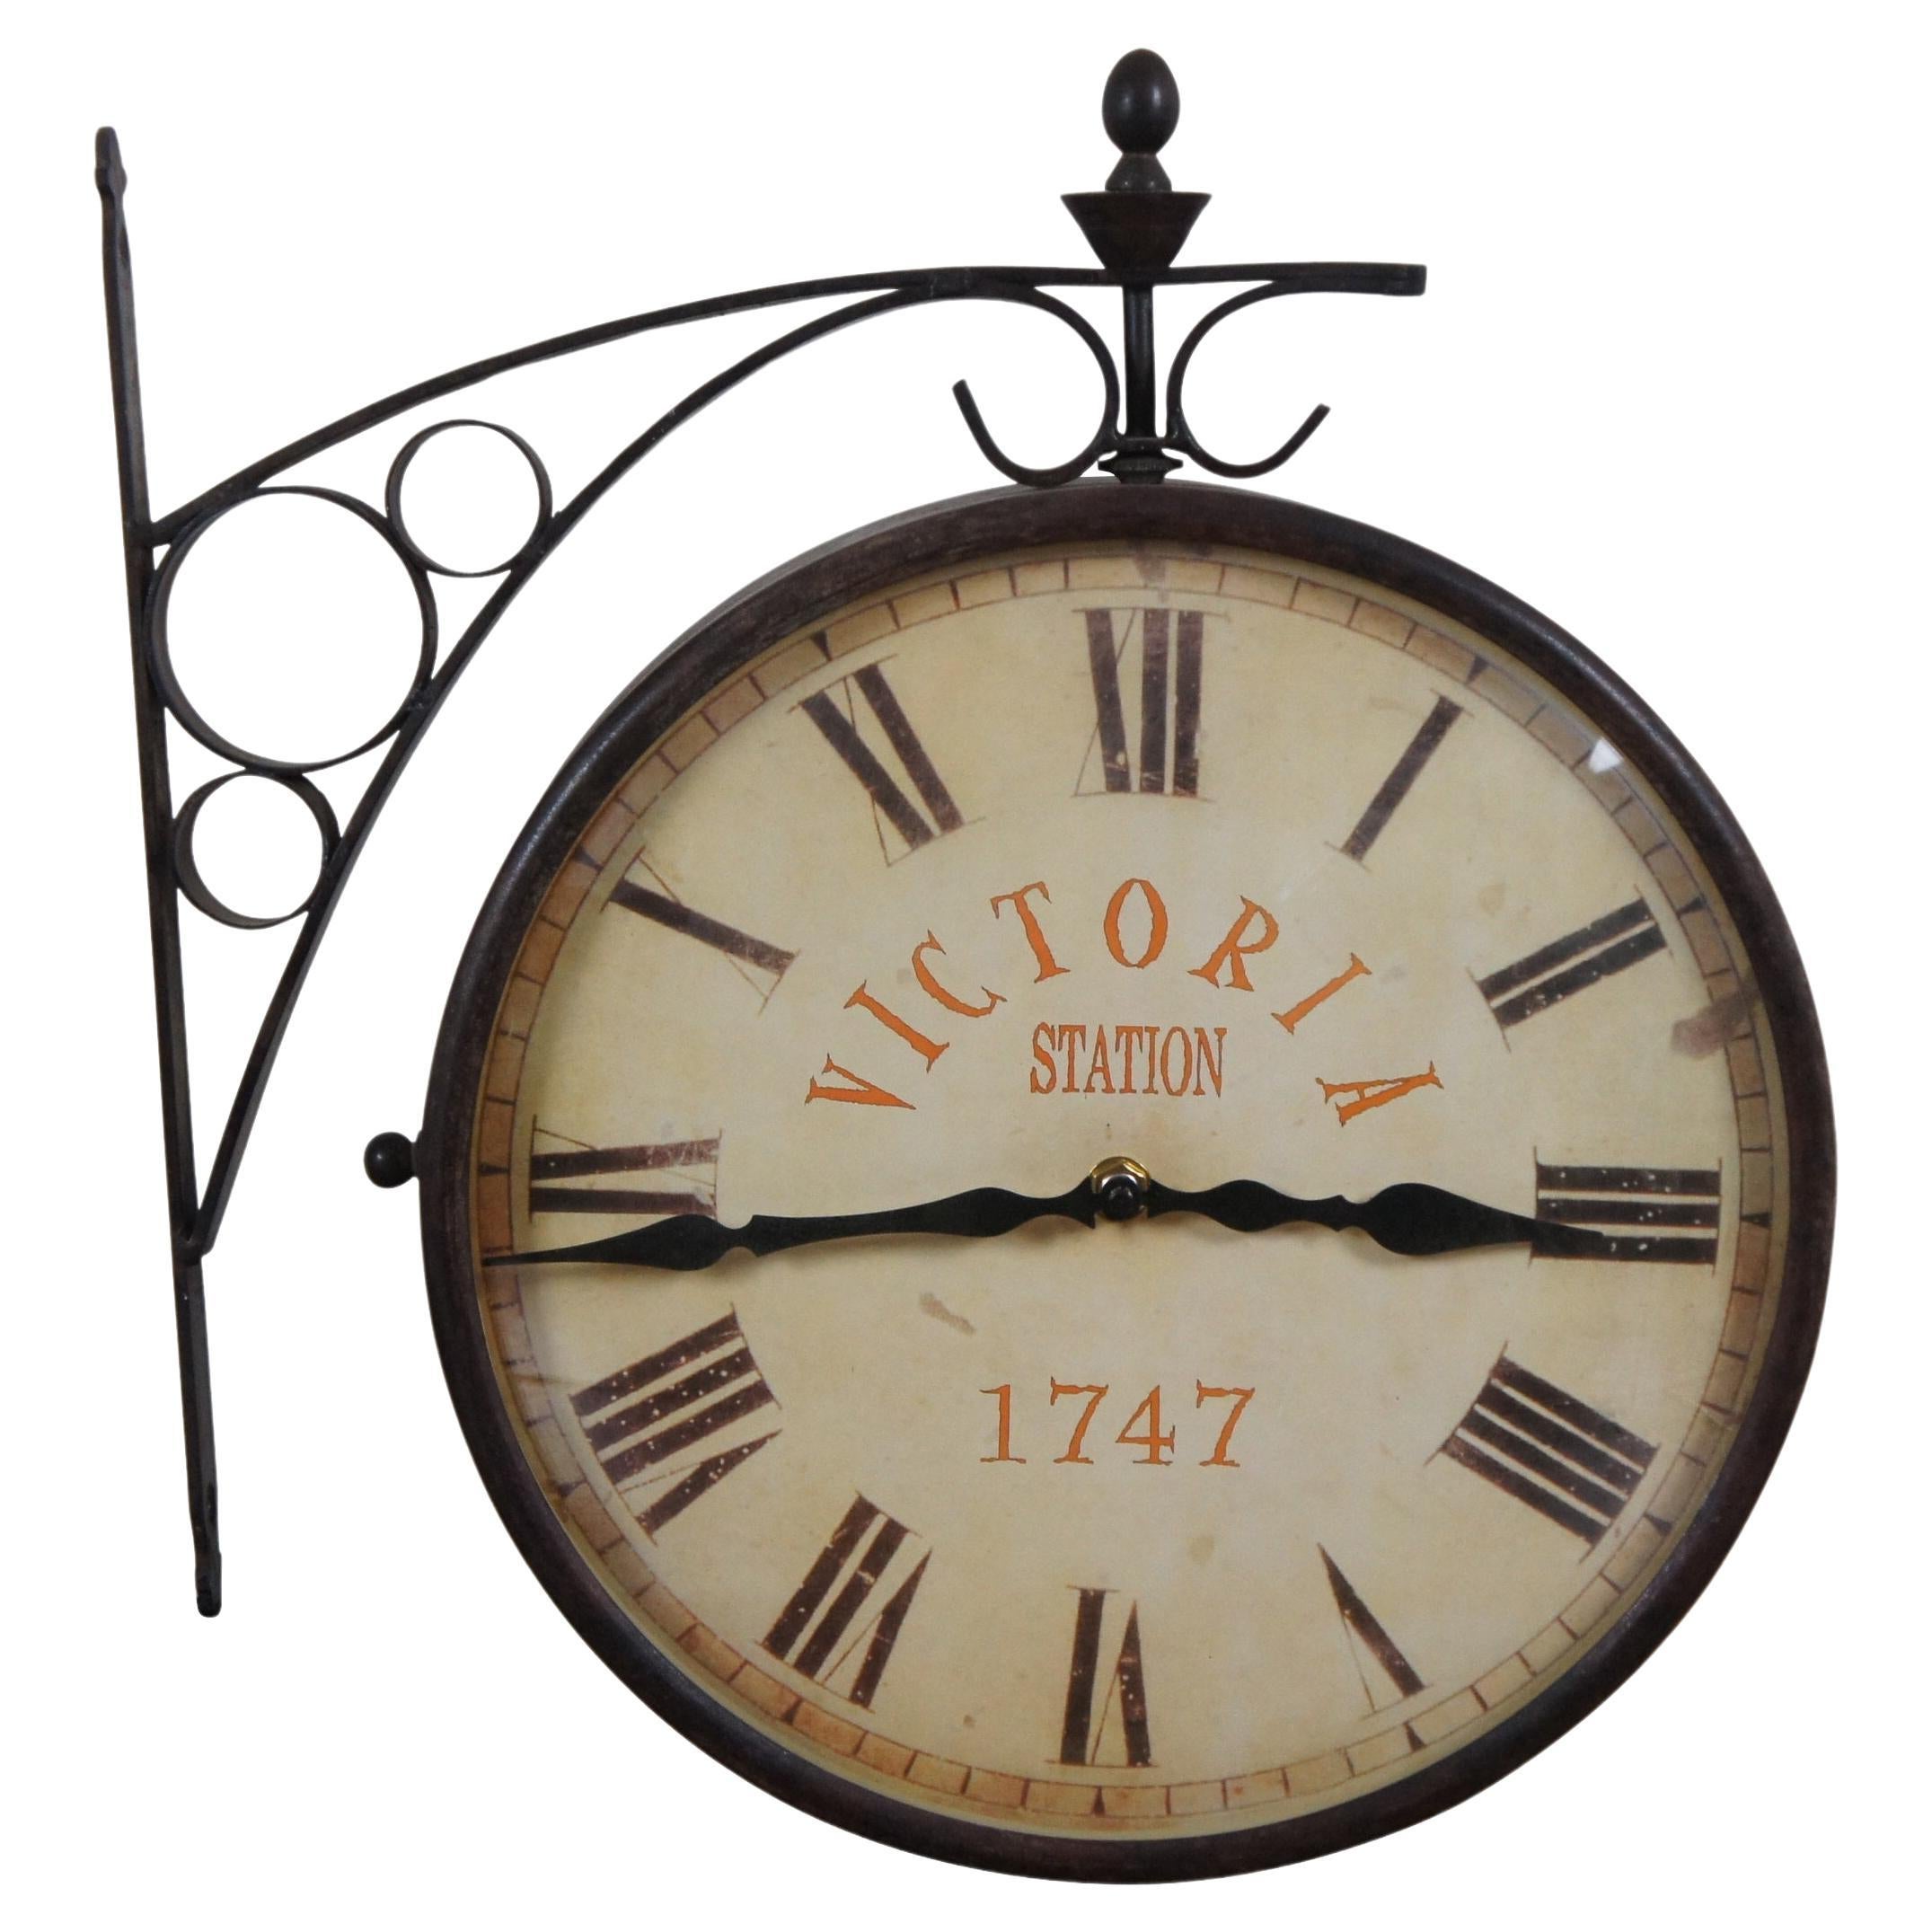 Vintage Victoria Station 1747 Double Sided Brass Wall Mount Railway Clock 15"